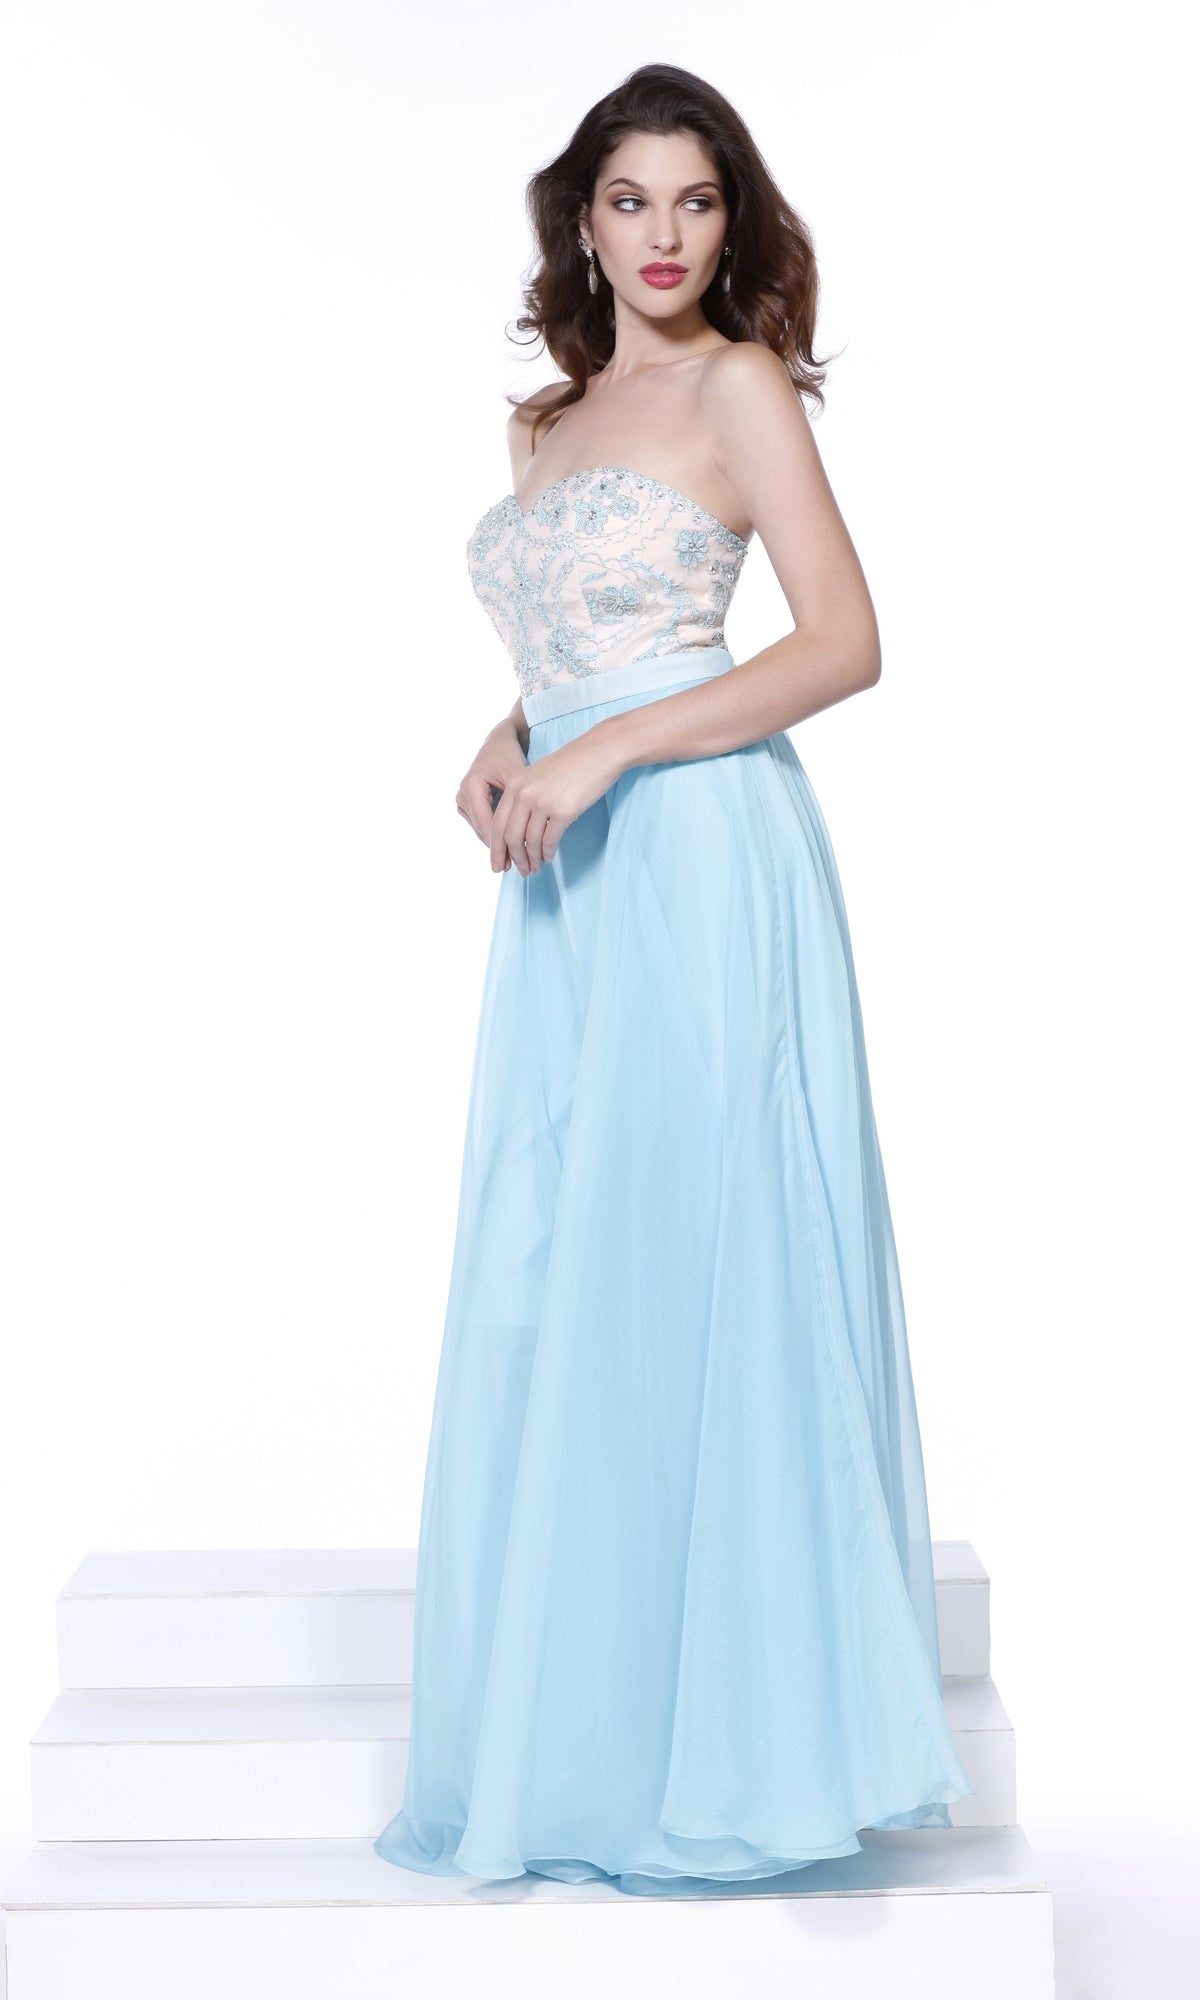 Aqua/Nude Lace-Up Strapless Sweetheart Long Prom Gown